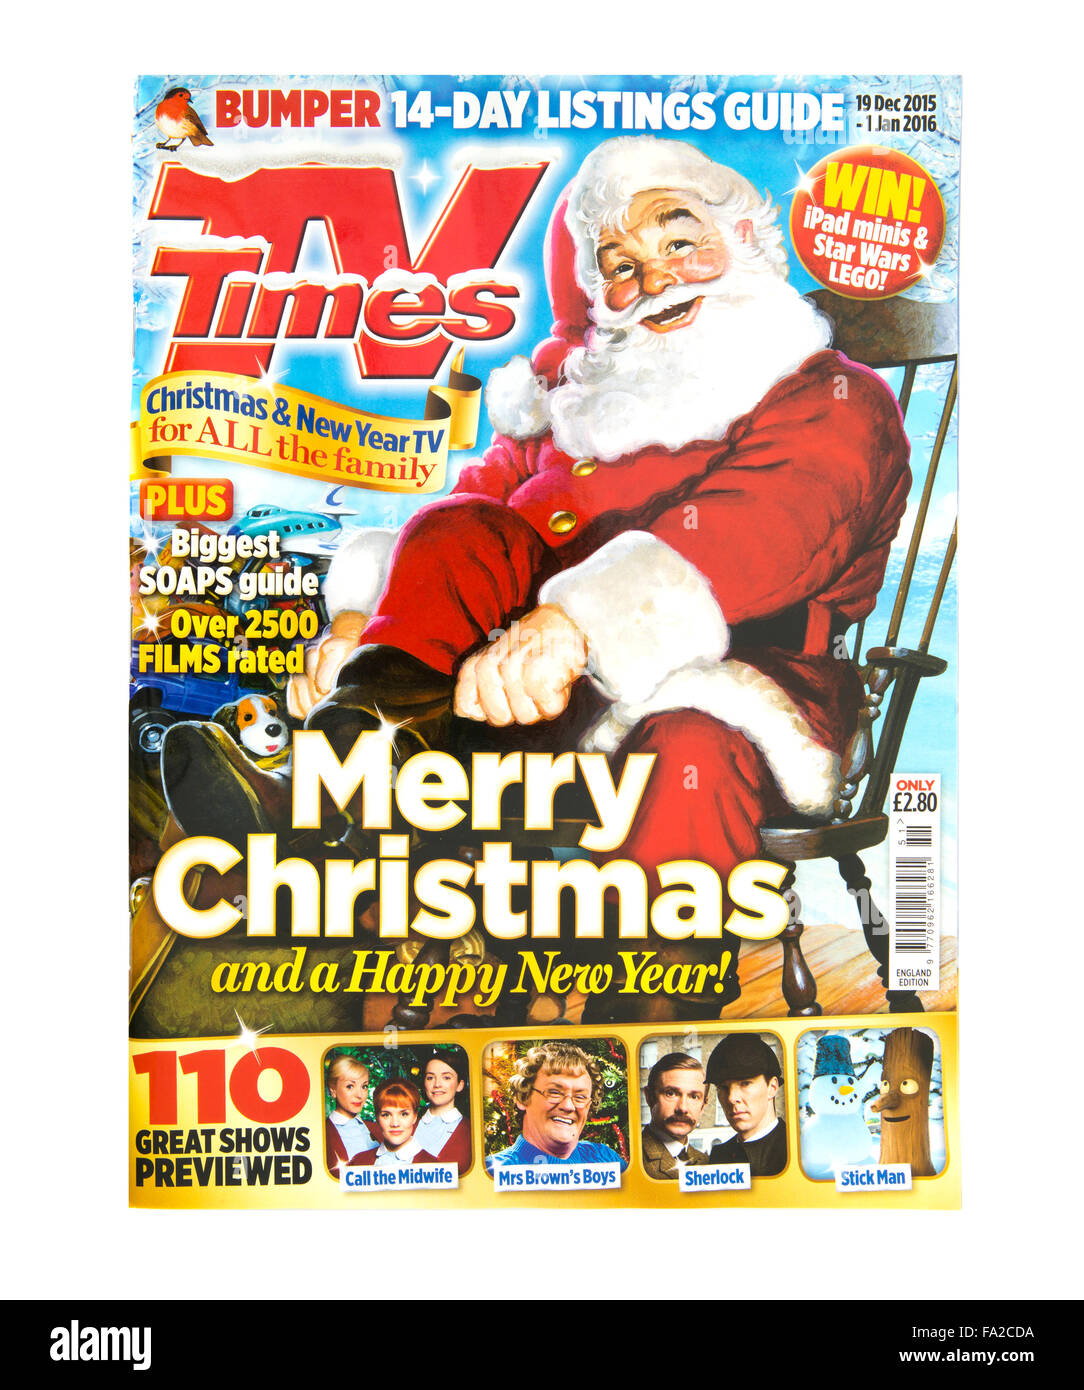 2015 Christmas issue of the TV Times television TV listings magazine Stock Photo